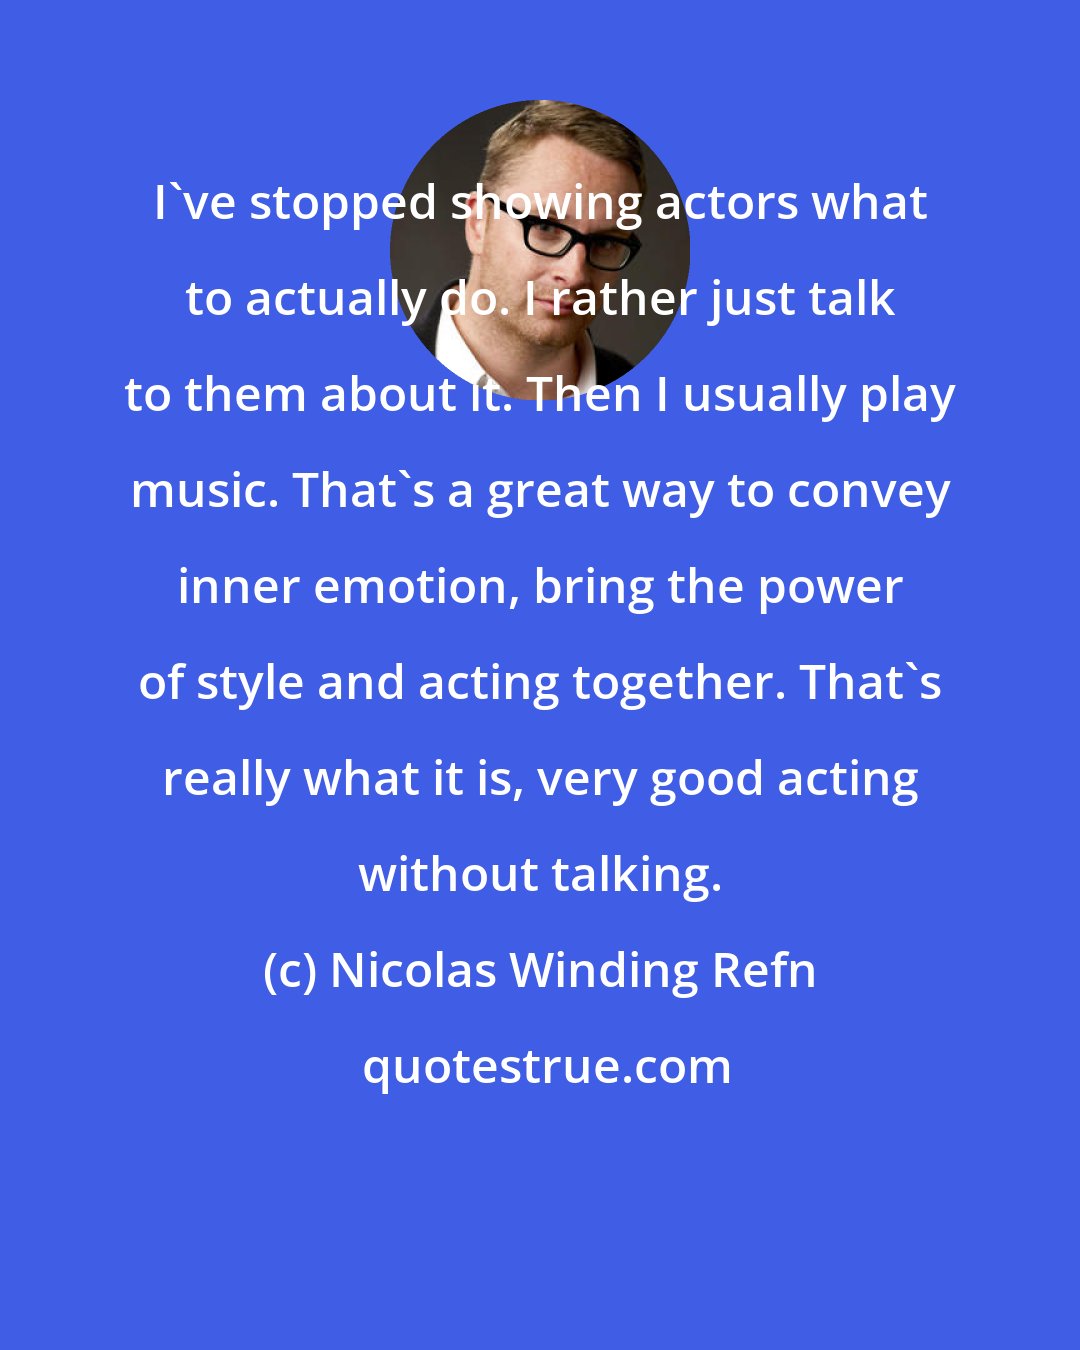 Nicolas Winding Refn: I've stopped showing actors what to actually do. I rather just talk to them about it. Then I usually play music. That's a great way to convey inner emotion, bring the power of style and acting together. That's really what it is, very good acting without talking.